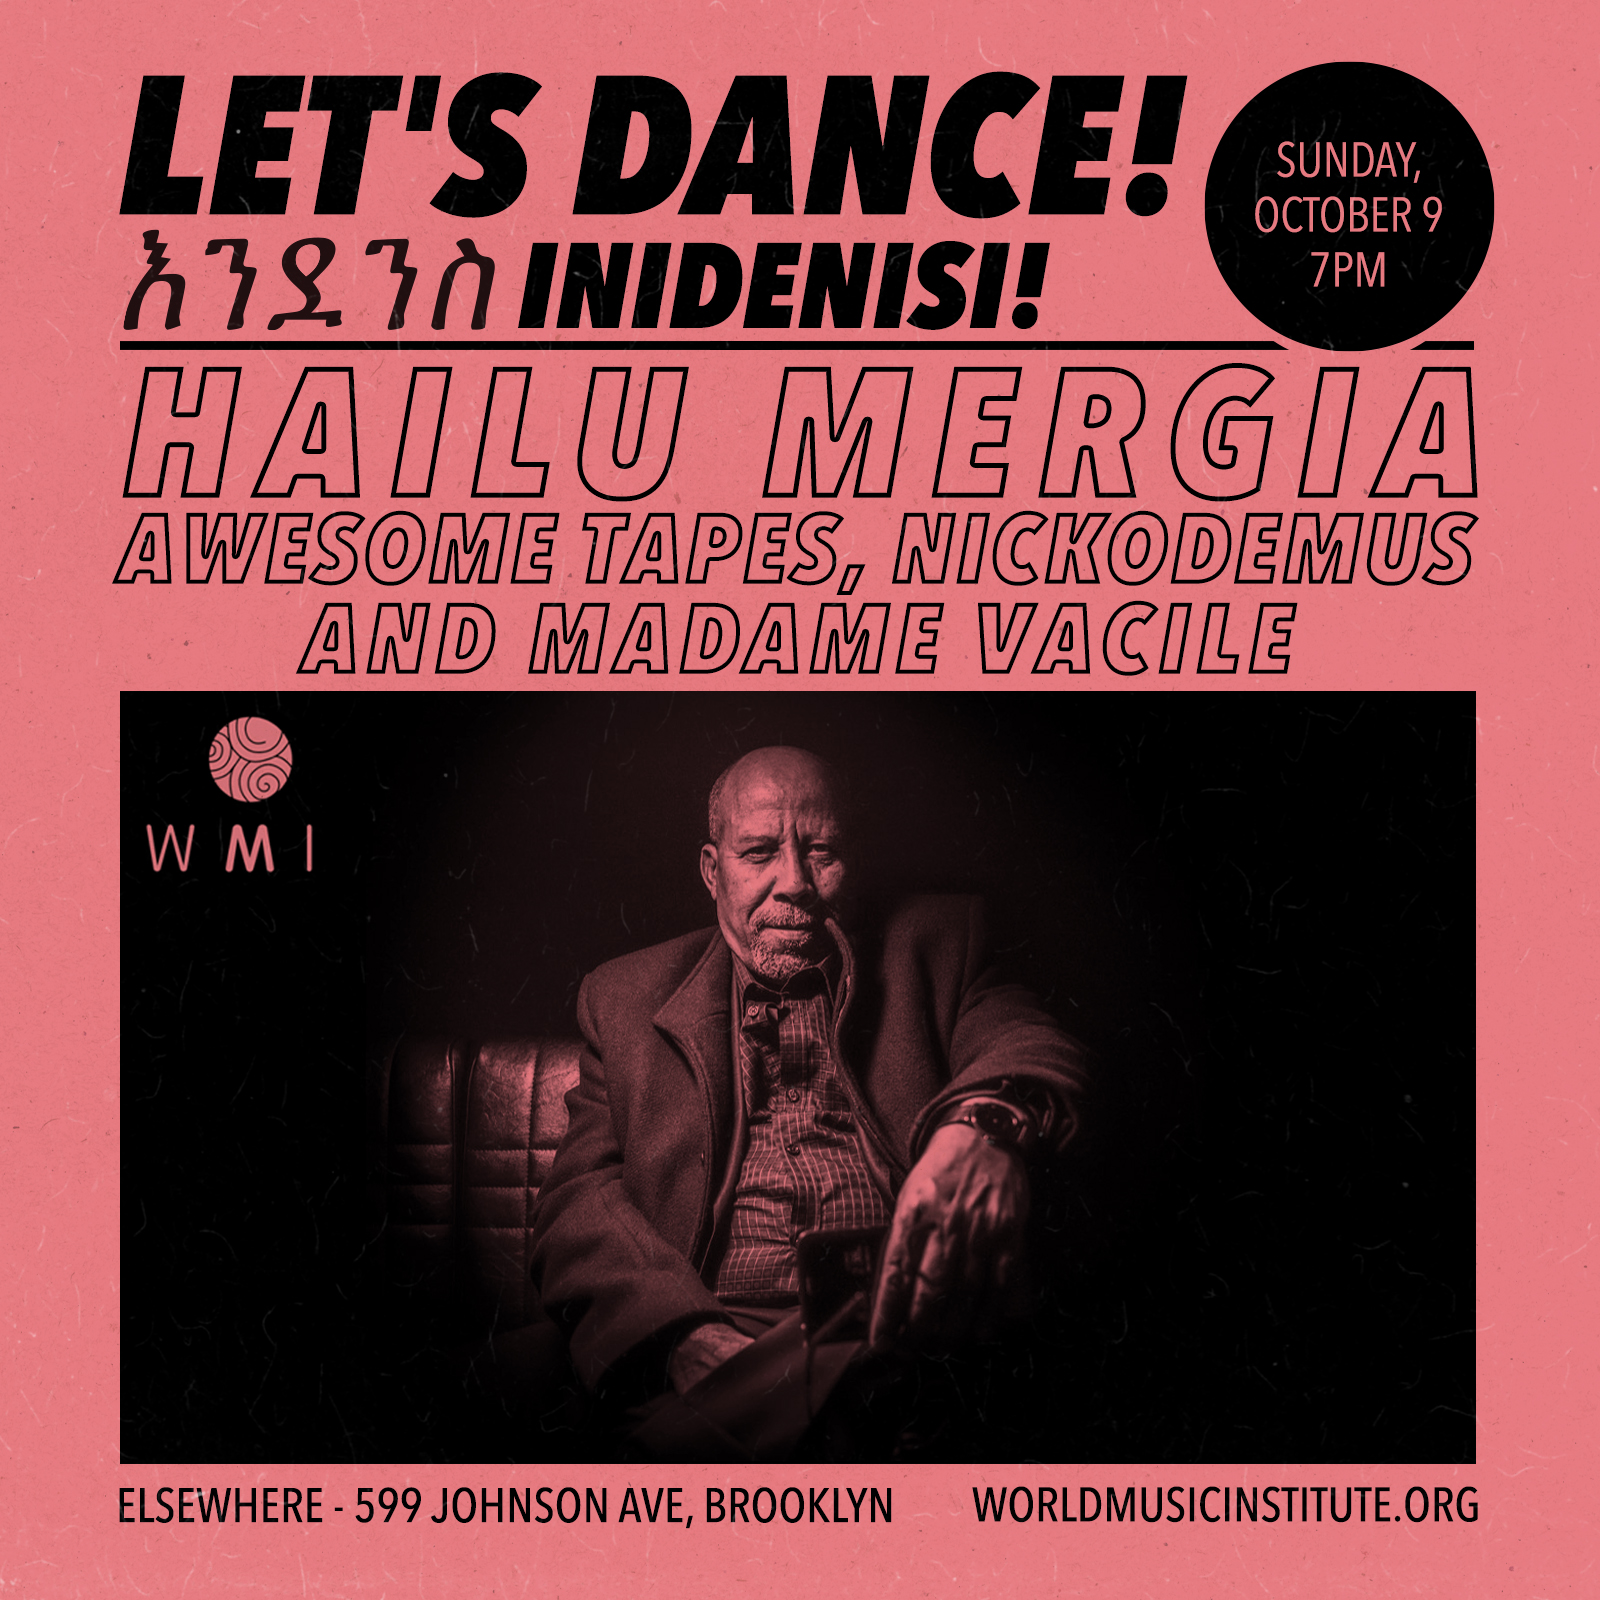 Let's Dance - Hailu Mergia w/ DJ sets by Awesome Tapes, Nickodemus